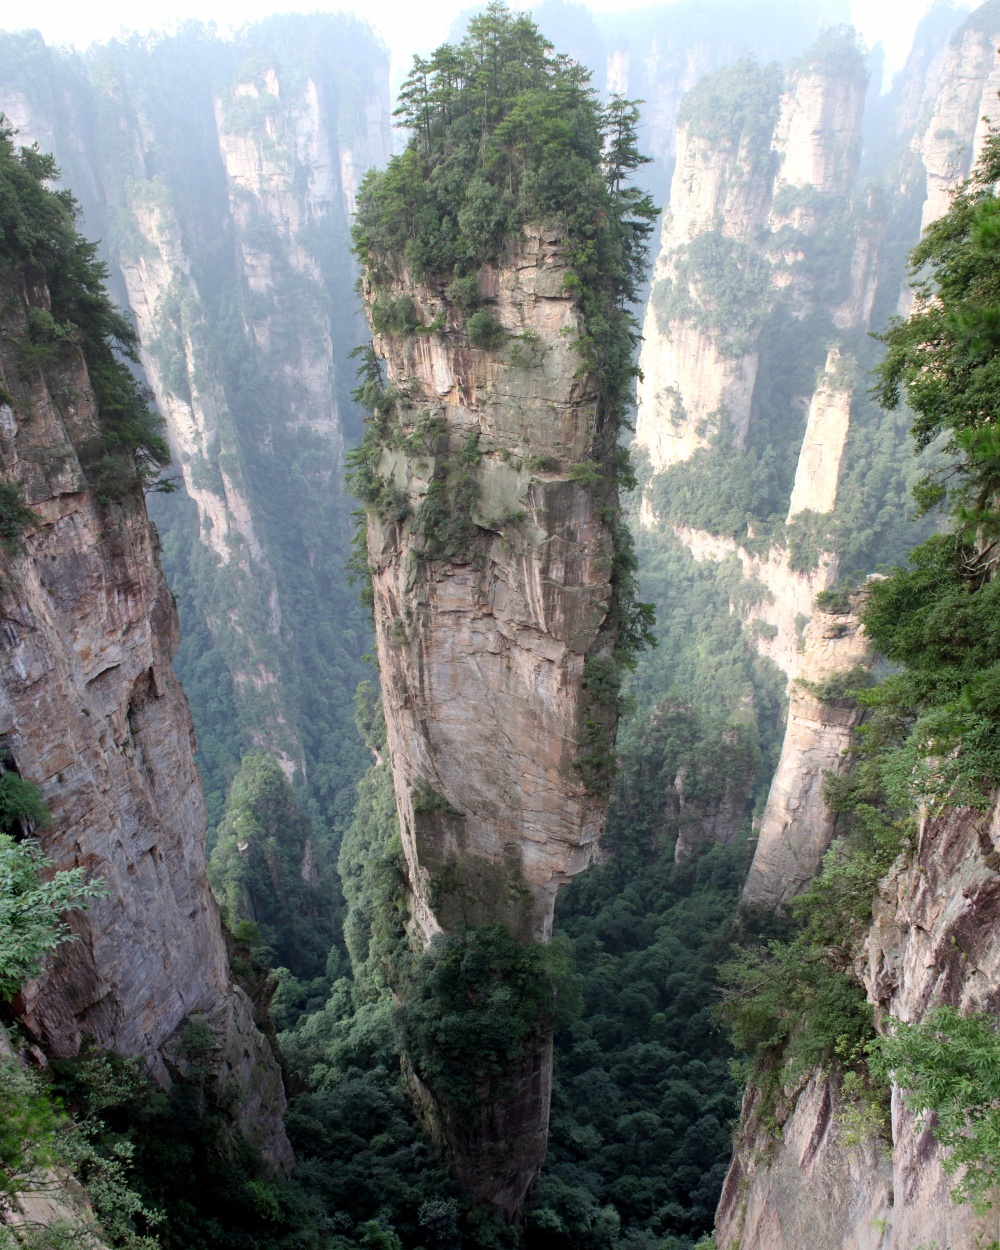 Tianzi Mountain (China) — inspiration for the landscapes of Pandora in Avatar